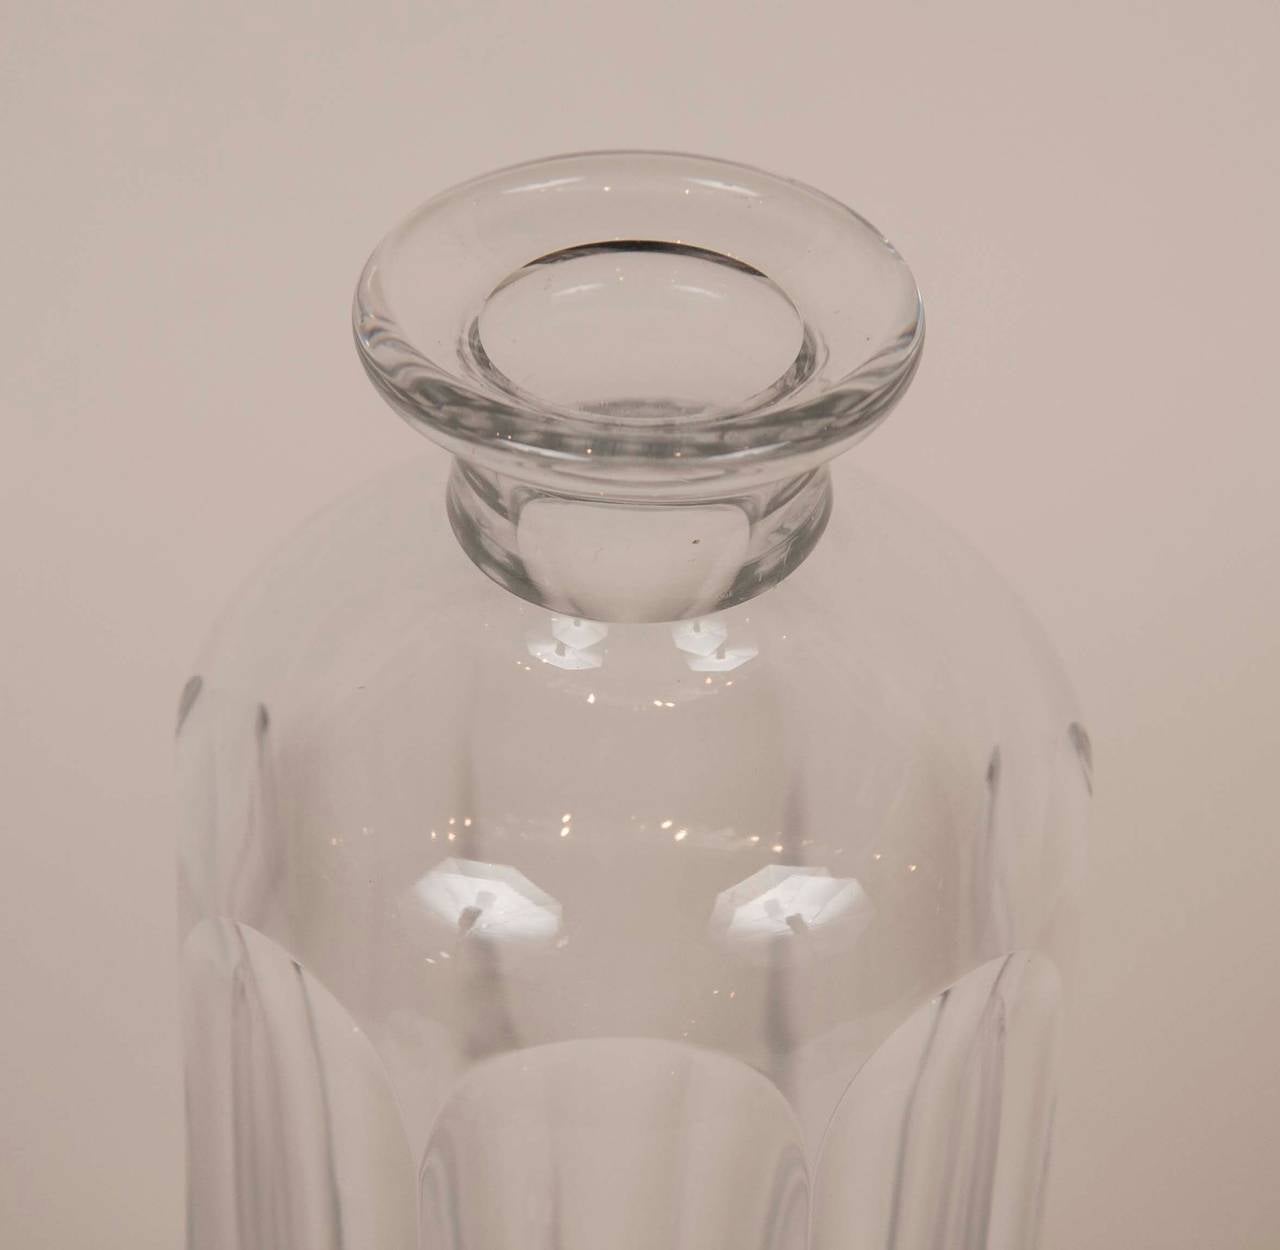 Georg Jensen Crystal Decanter In Excellent Condition For Sale In Stamford, CT